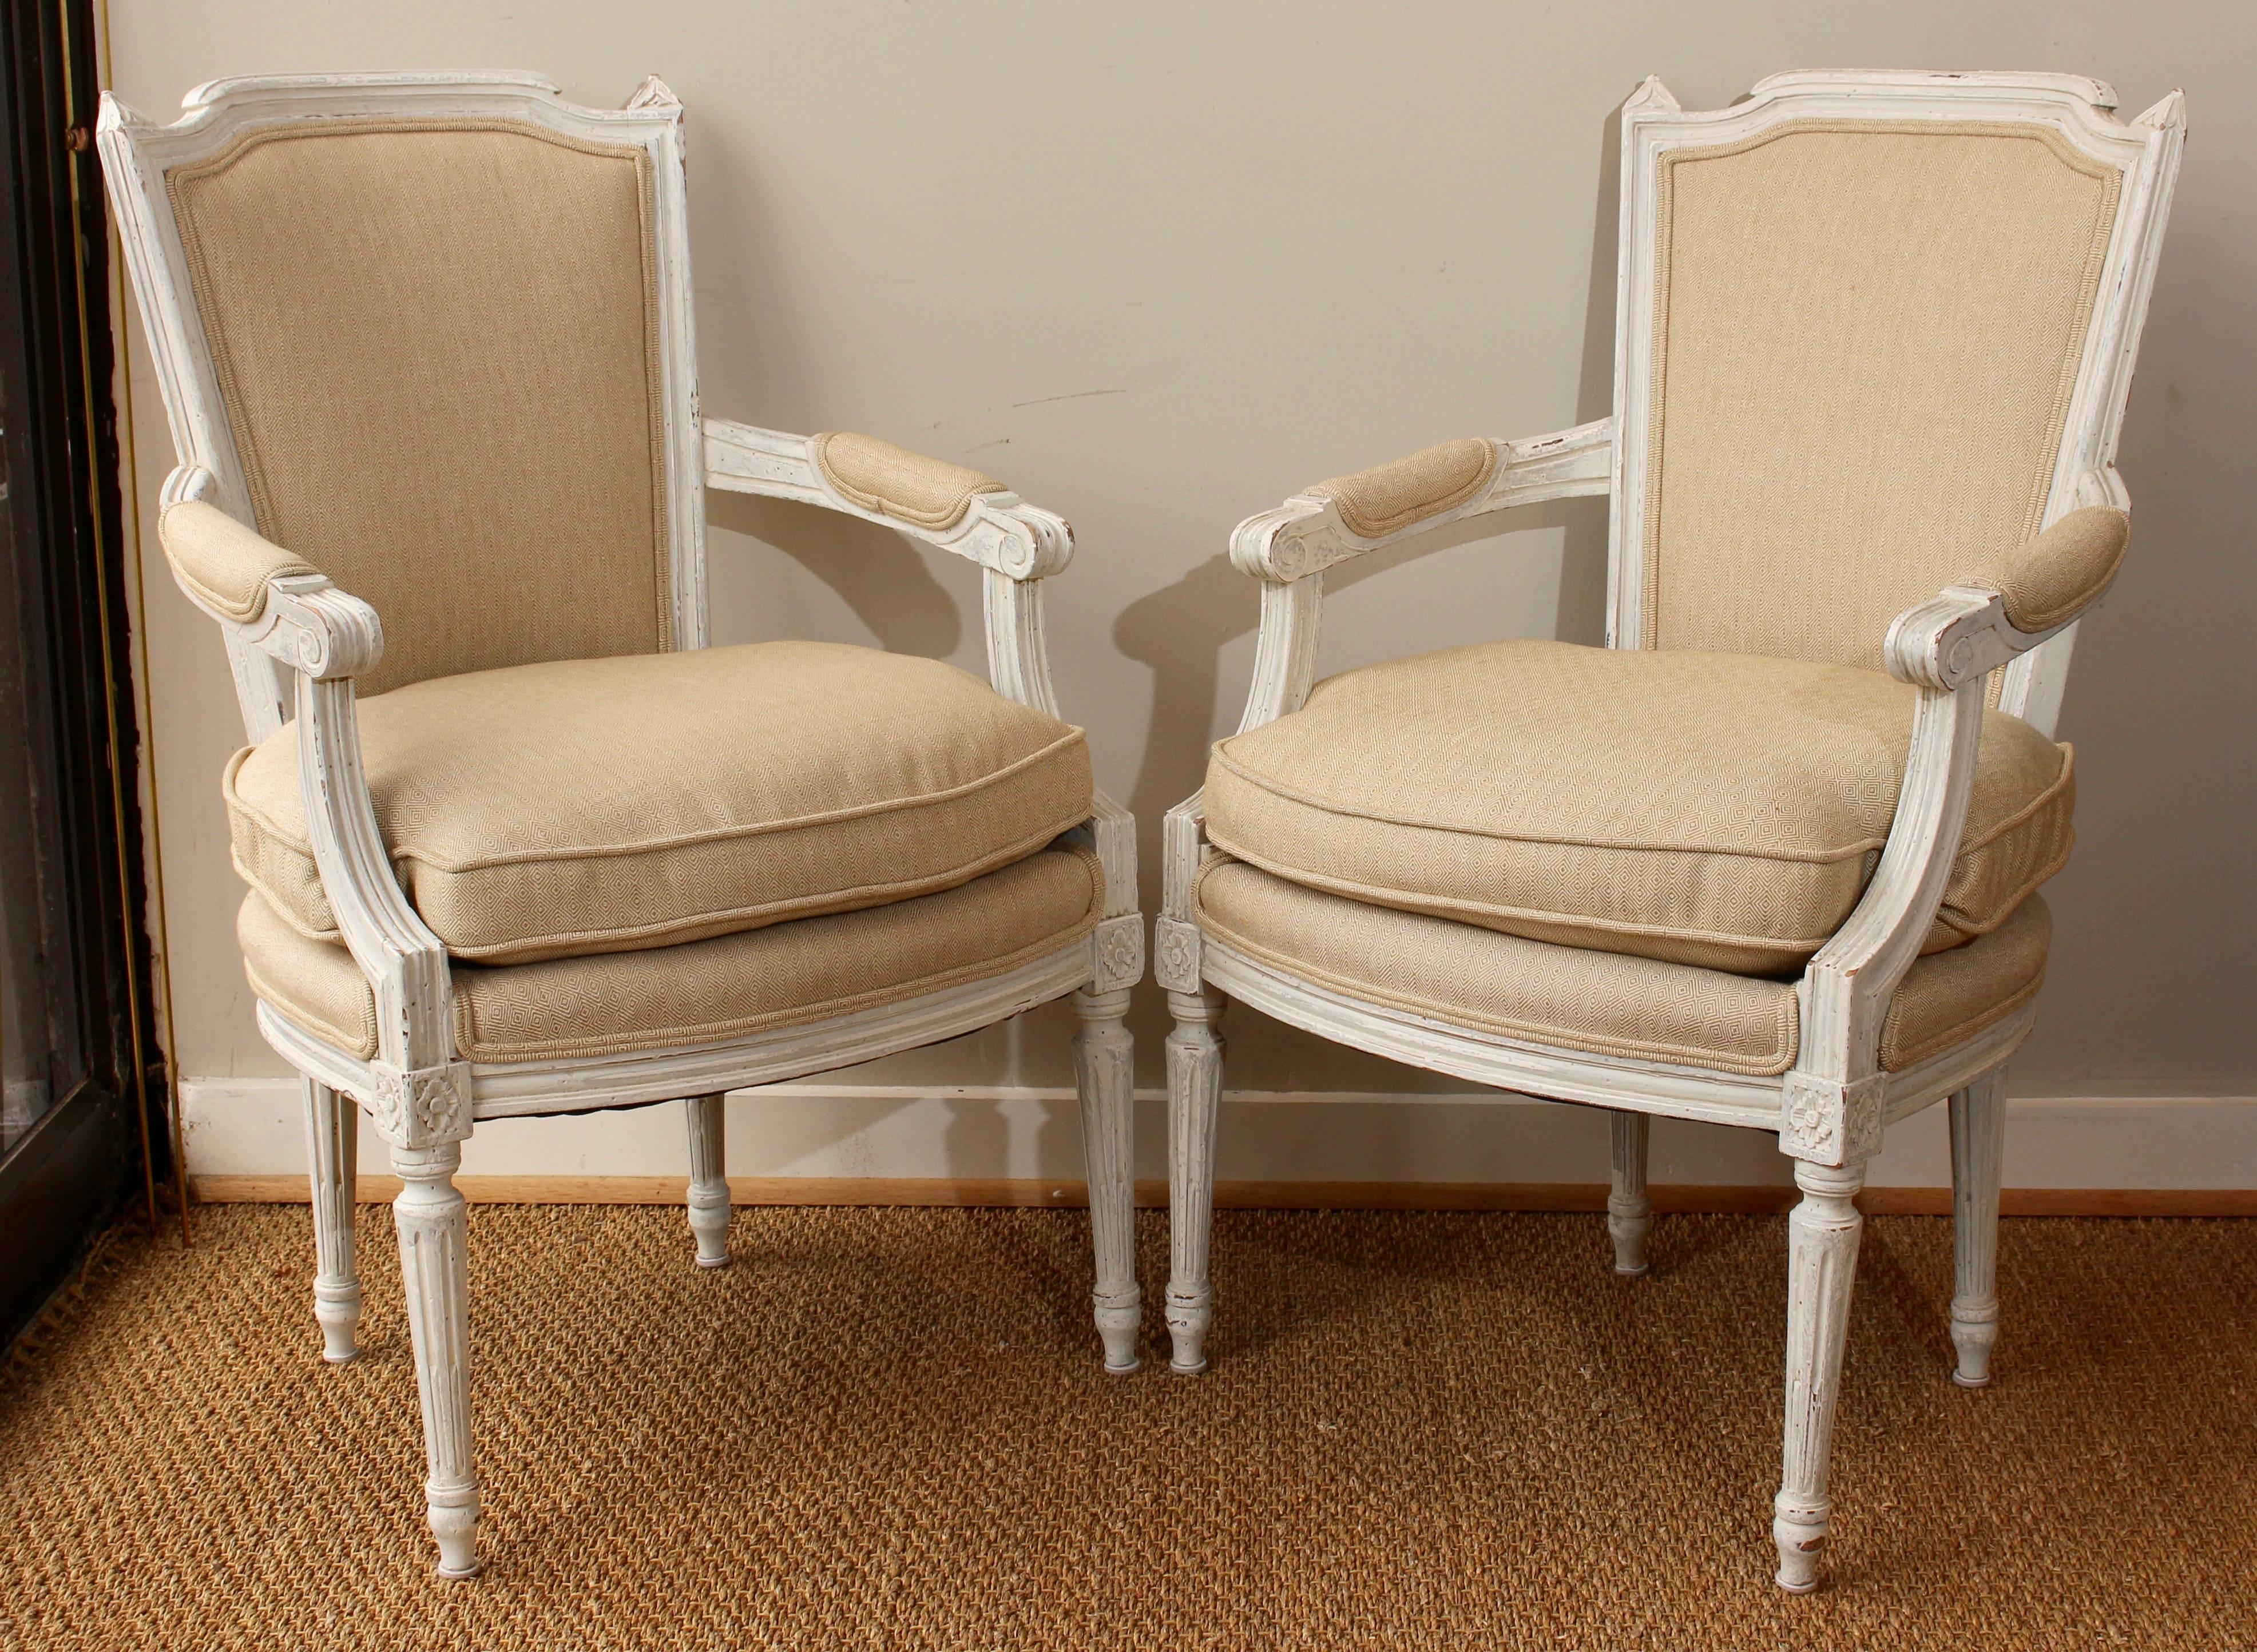 An early 20th century pair of hand-carved and painted French fauteuils newly upholstered in Italian linen with down-filled cushions.